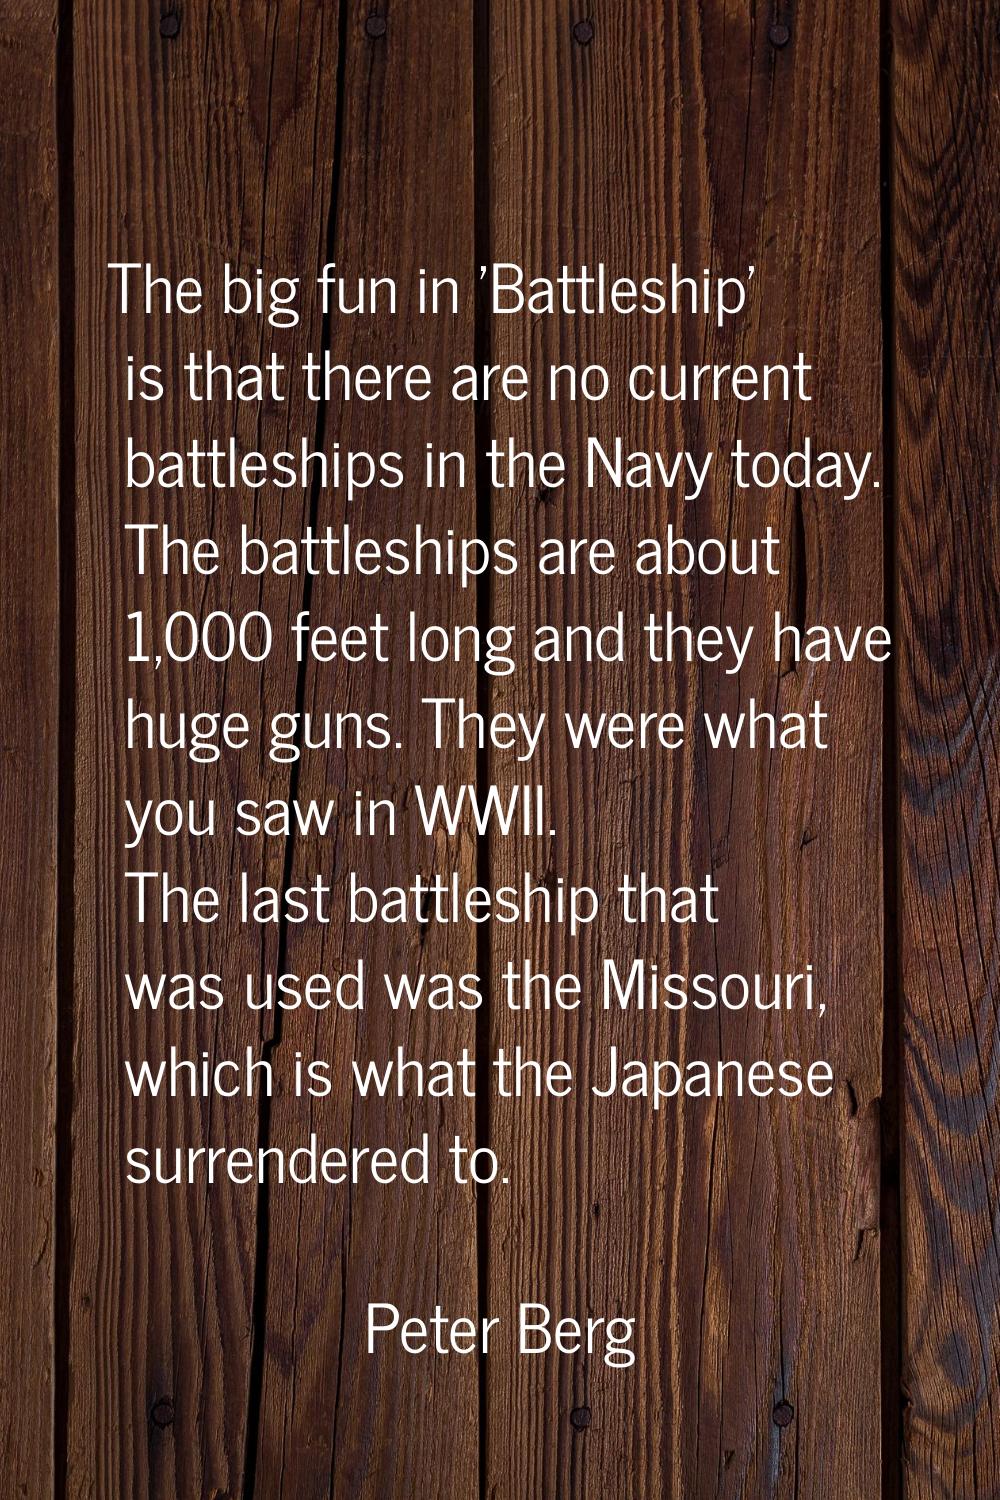 The big fun in 'Battleship' is that there are no current battleships in the Navy today. The battles